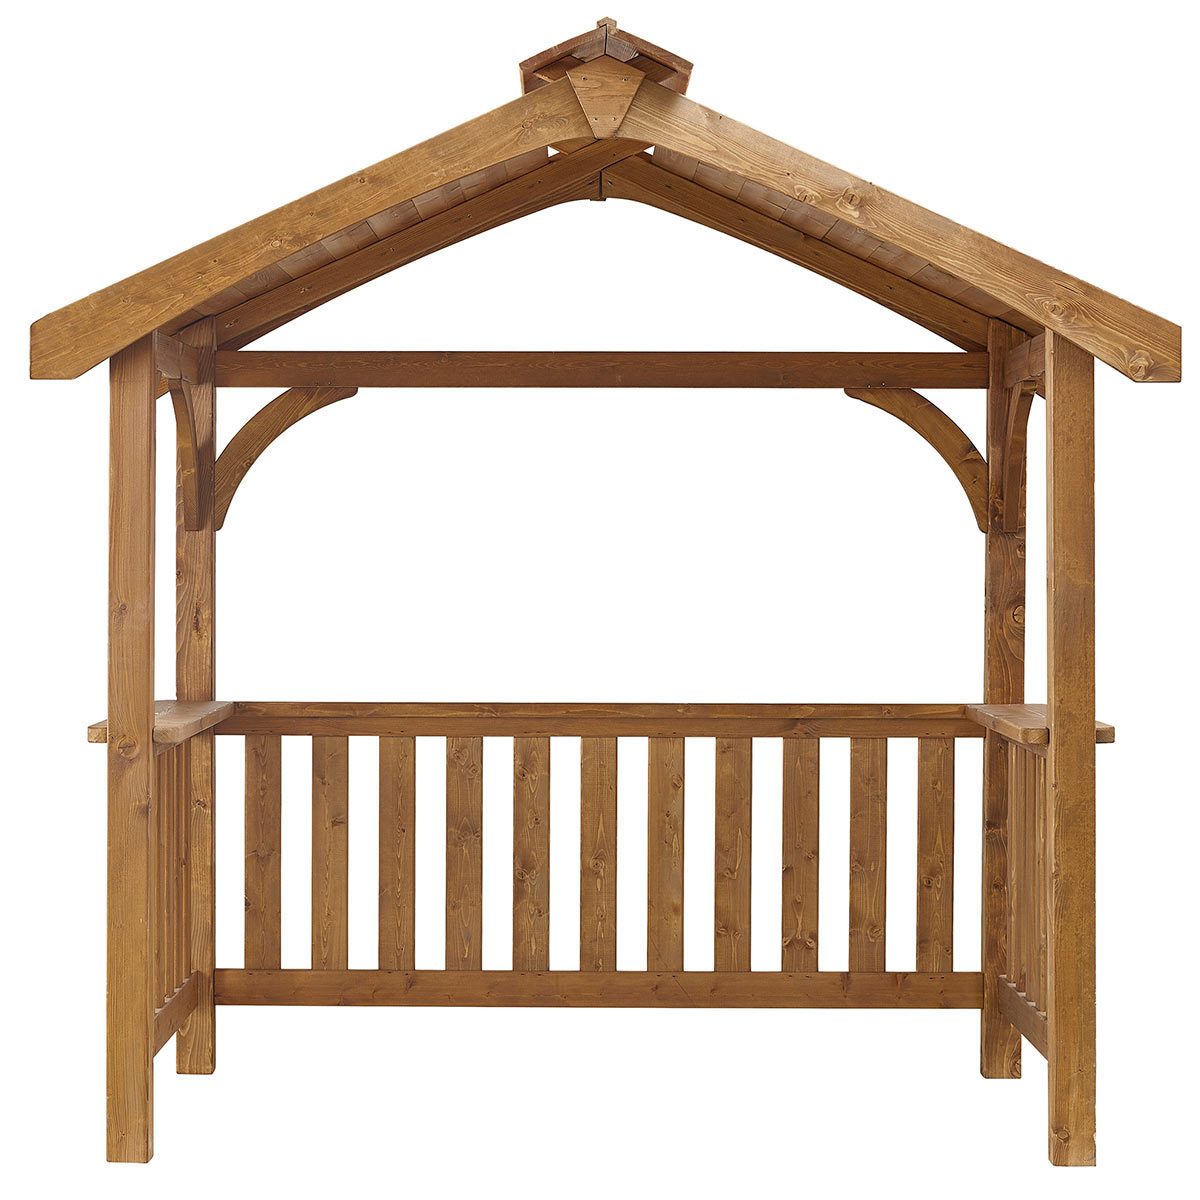 Anchor Fast Pine Wood BBQ Grilling Pavilion - Signature Retail Stores